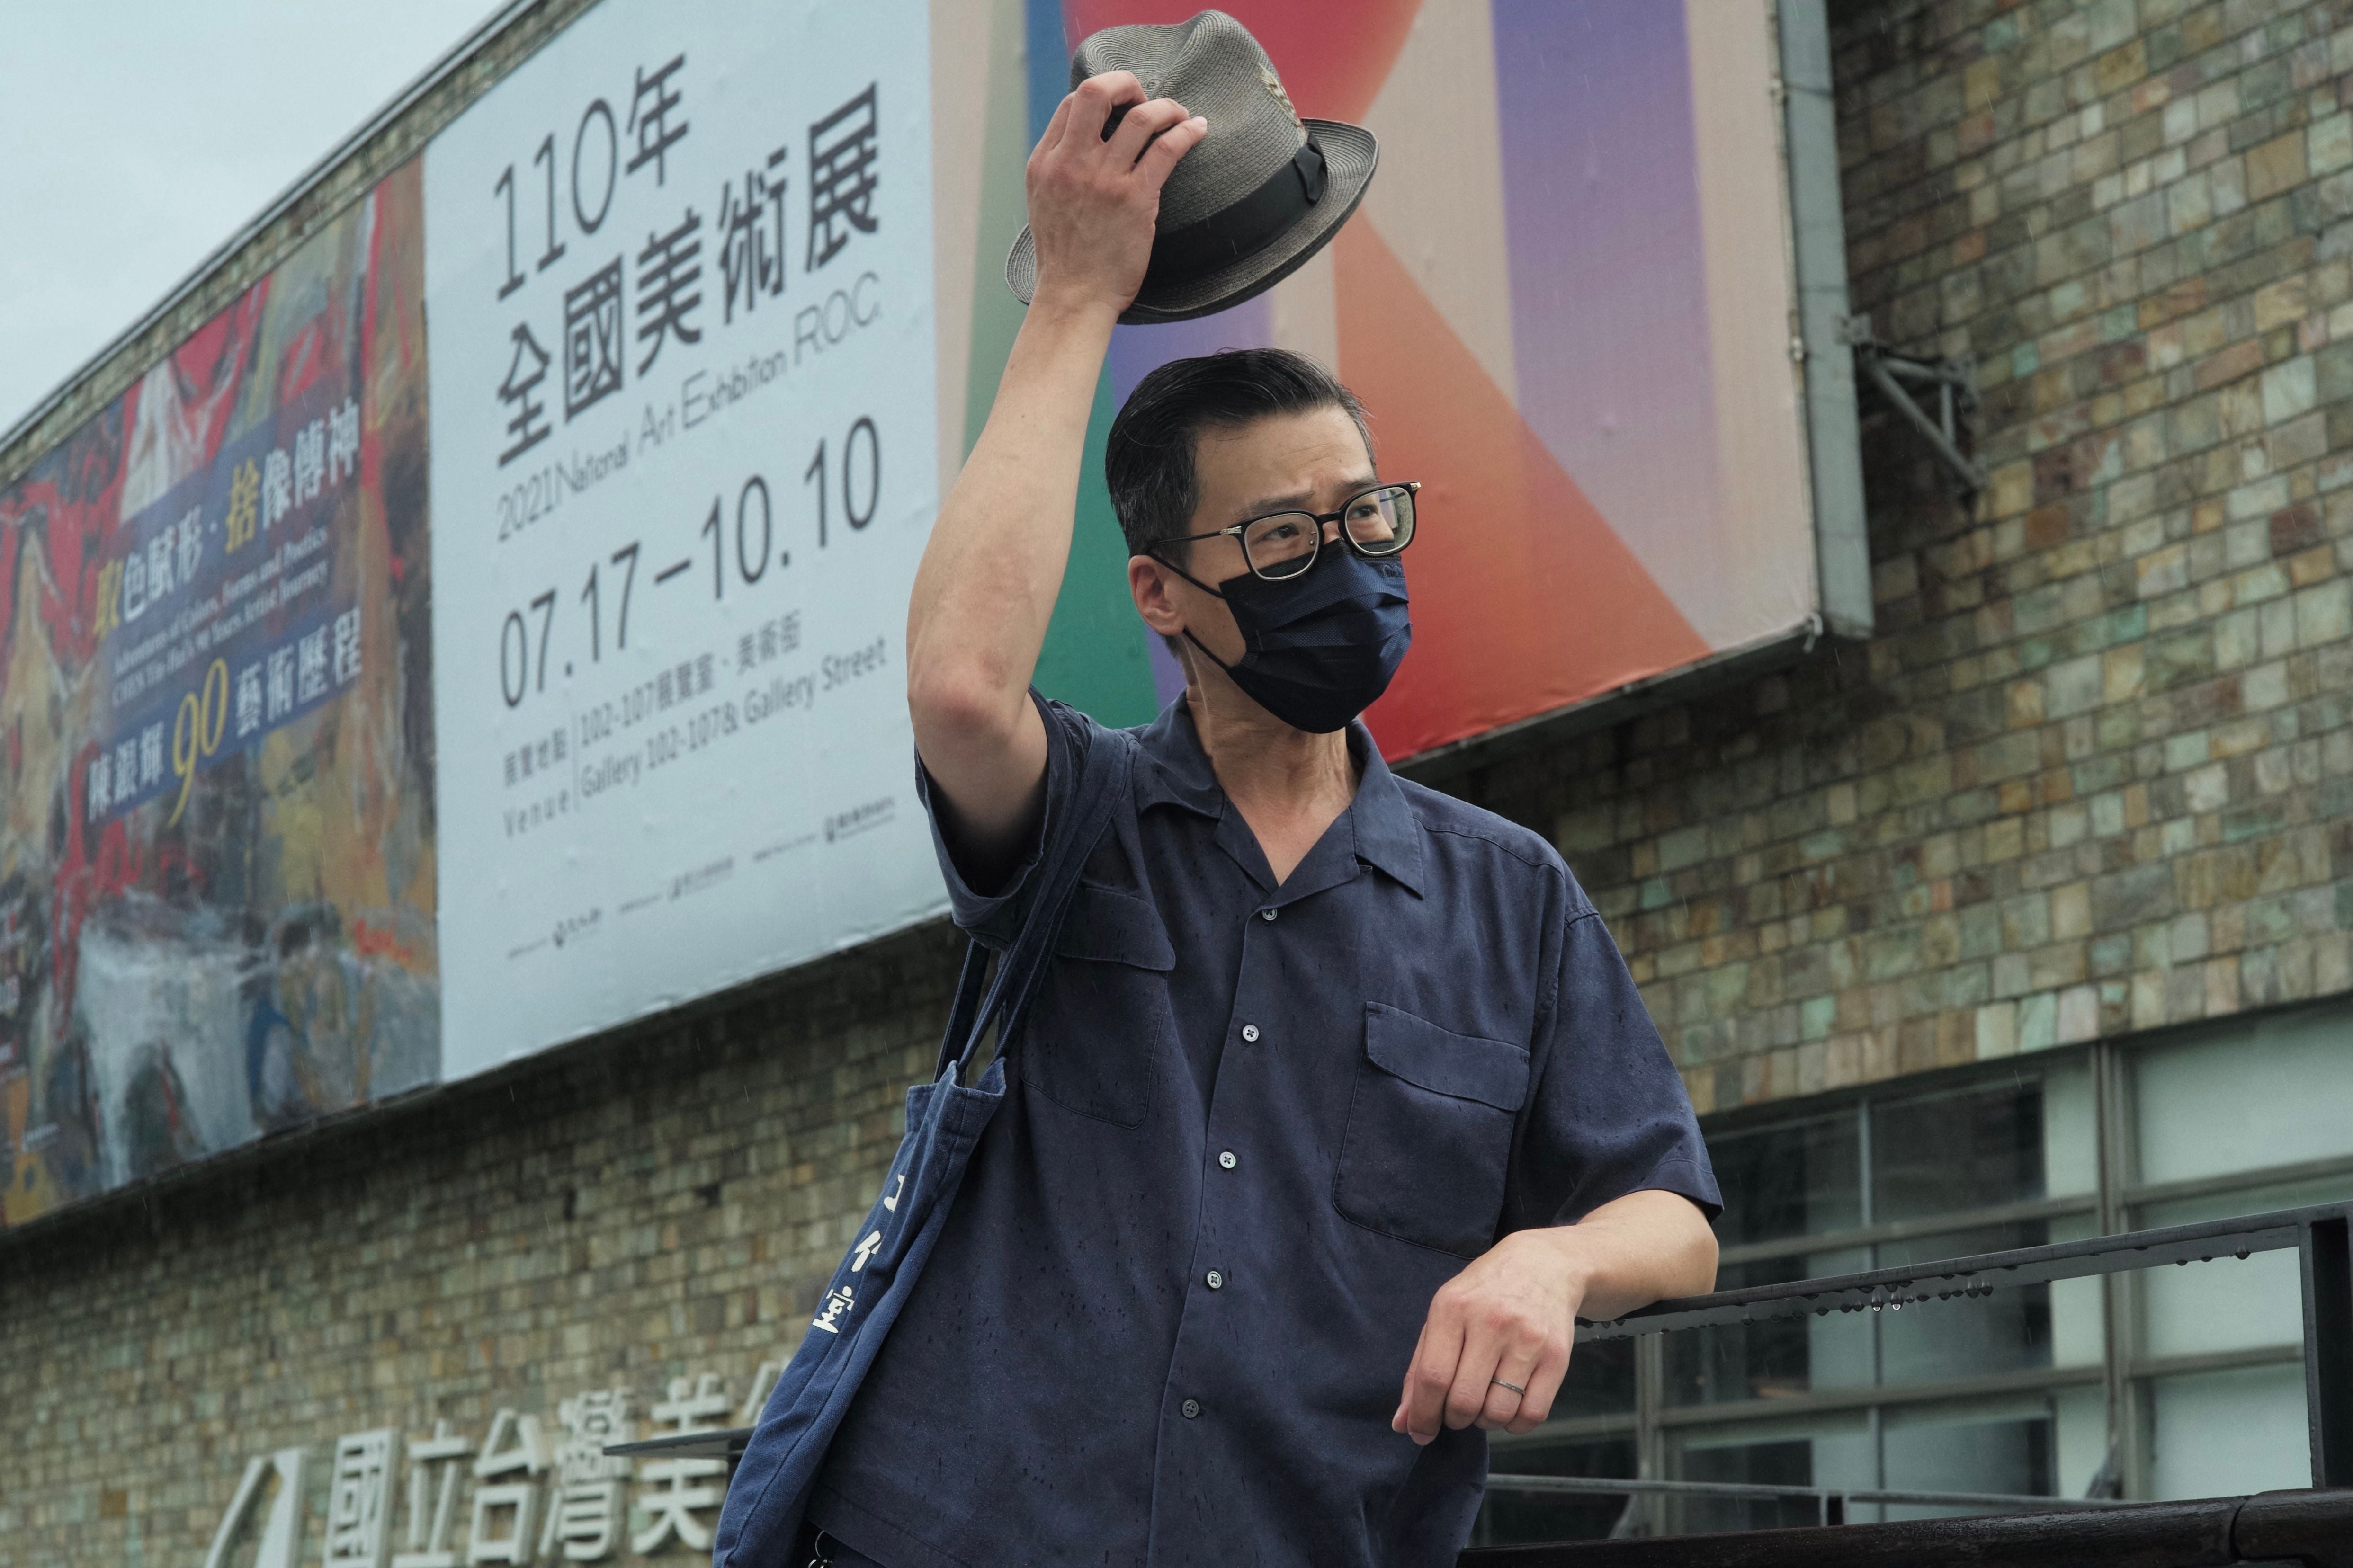 Hong Kong artist Kacey Wong at the National Taiwan Museum of Fine Arts after he fled the region